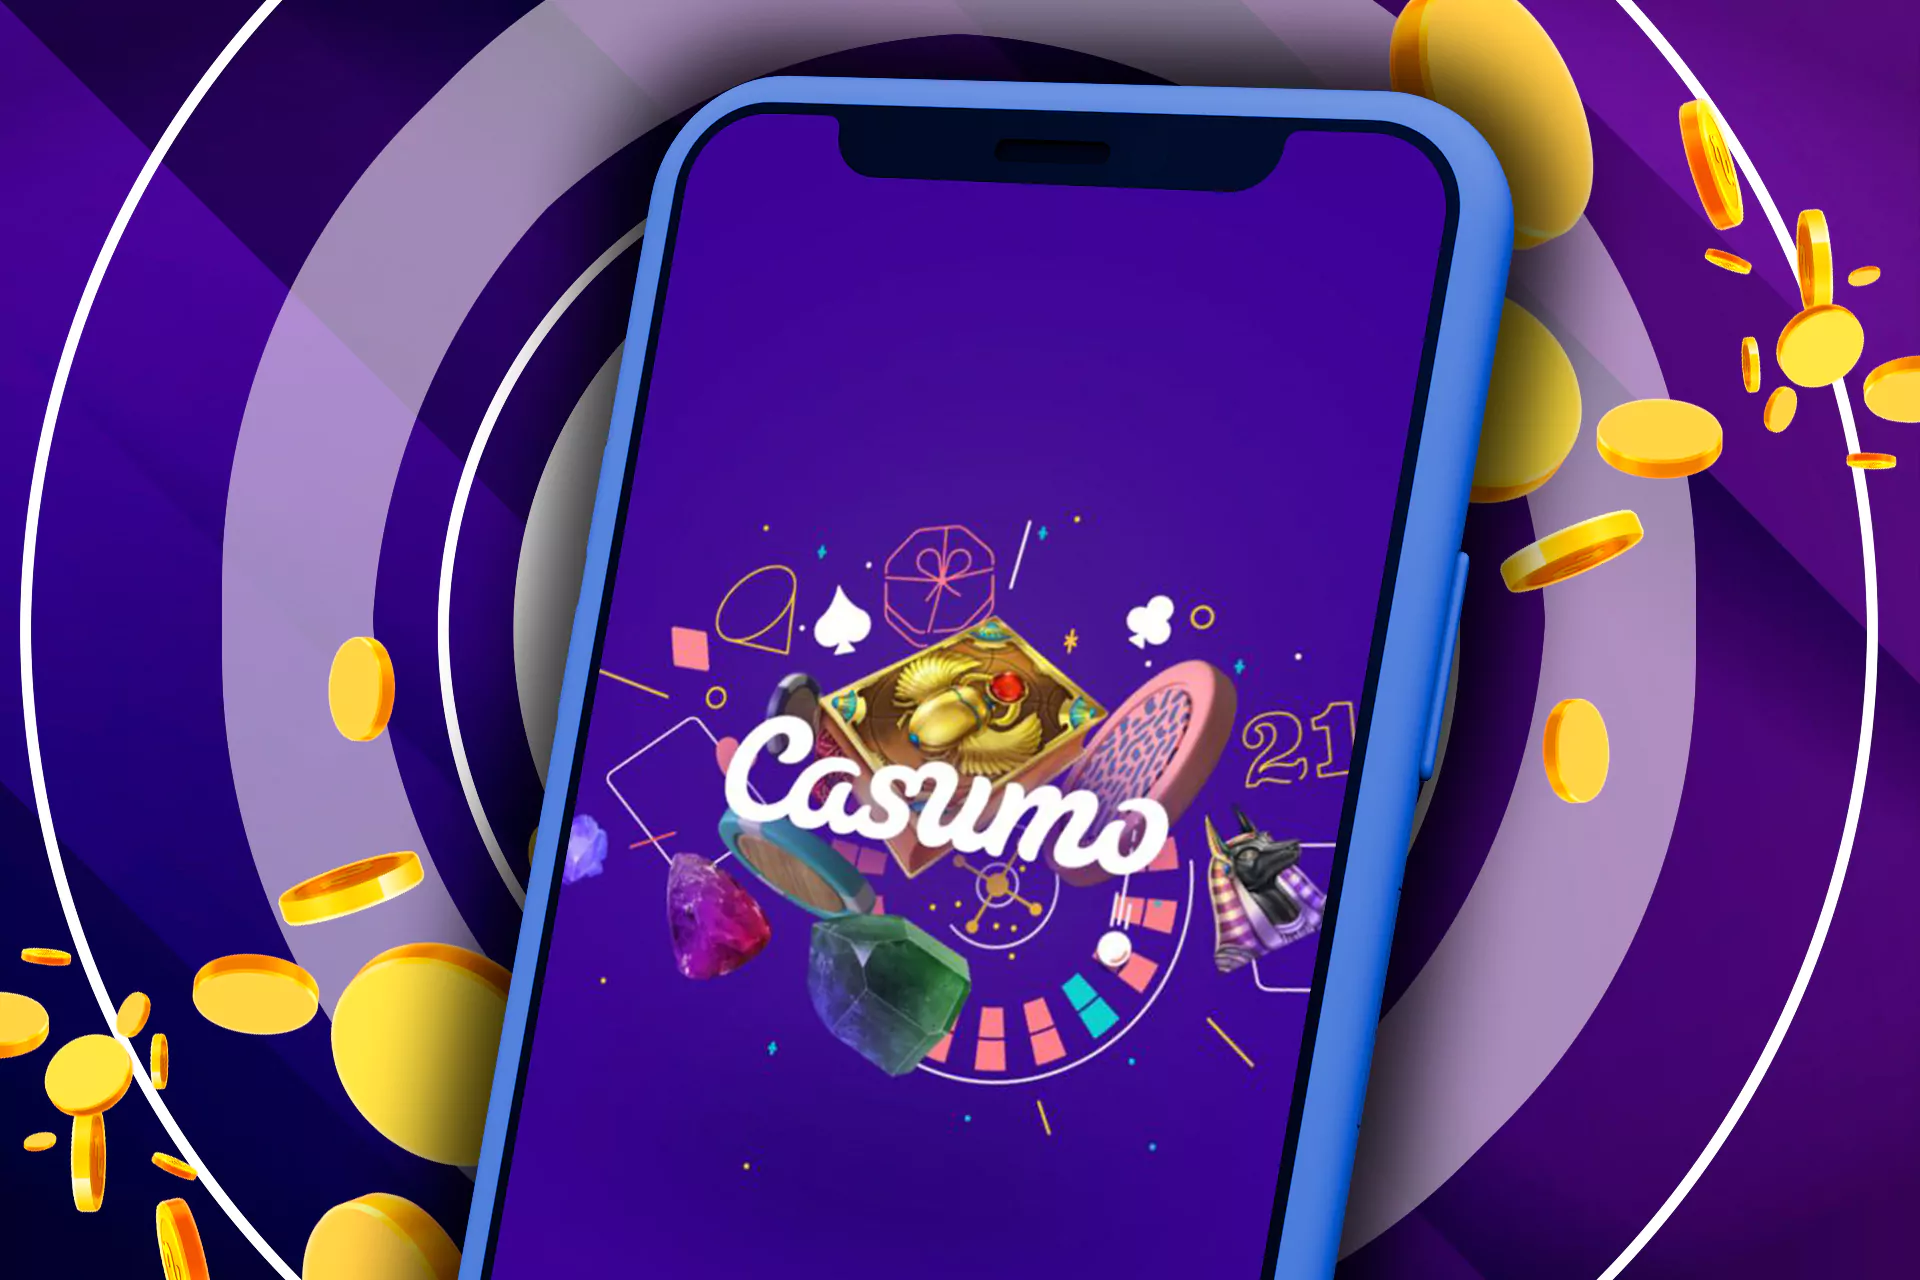 The Casumo app has nice features that make the betting and playing casino process even more comfortable and enjoyable.